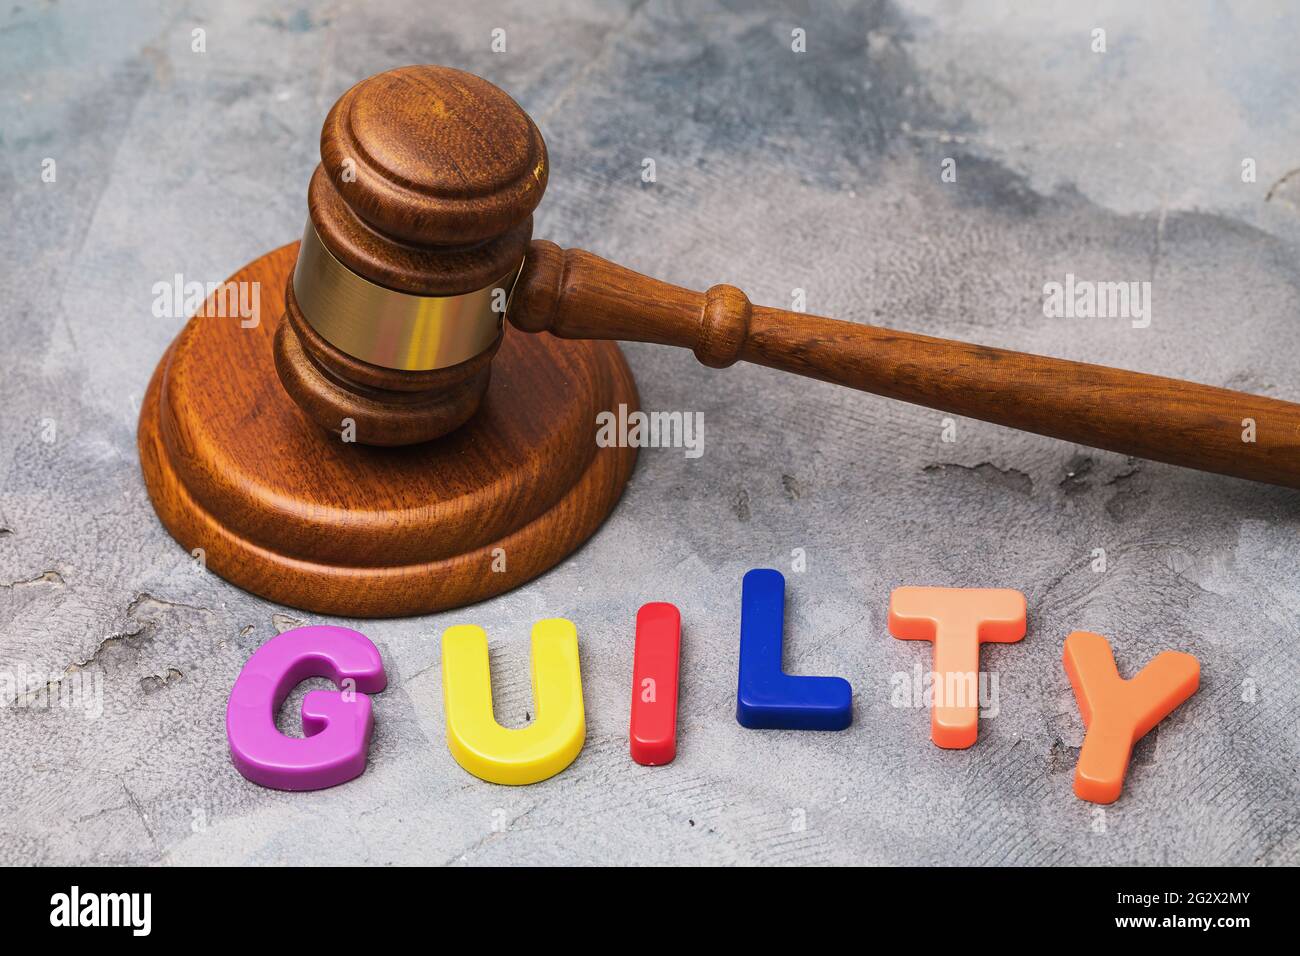 Judge gavel and word from multicolored plastic letters on table, guilt concept. Stock Photo